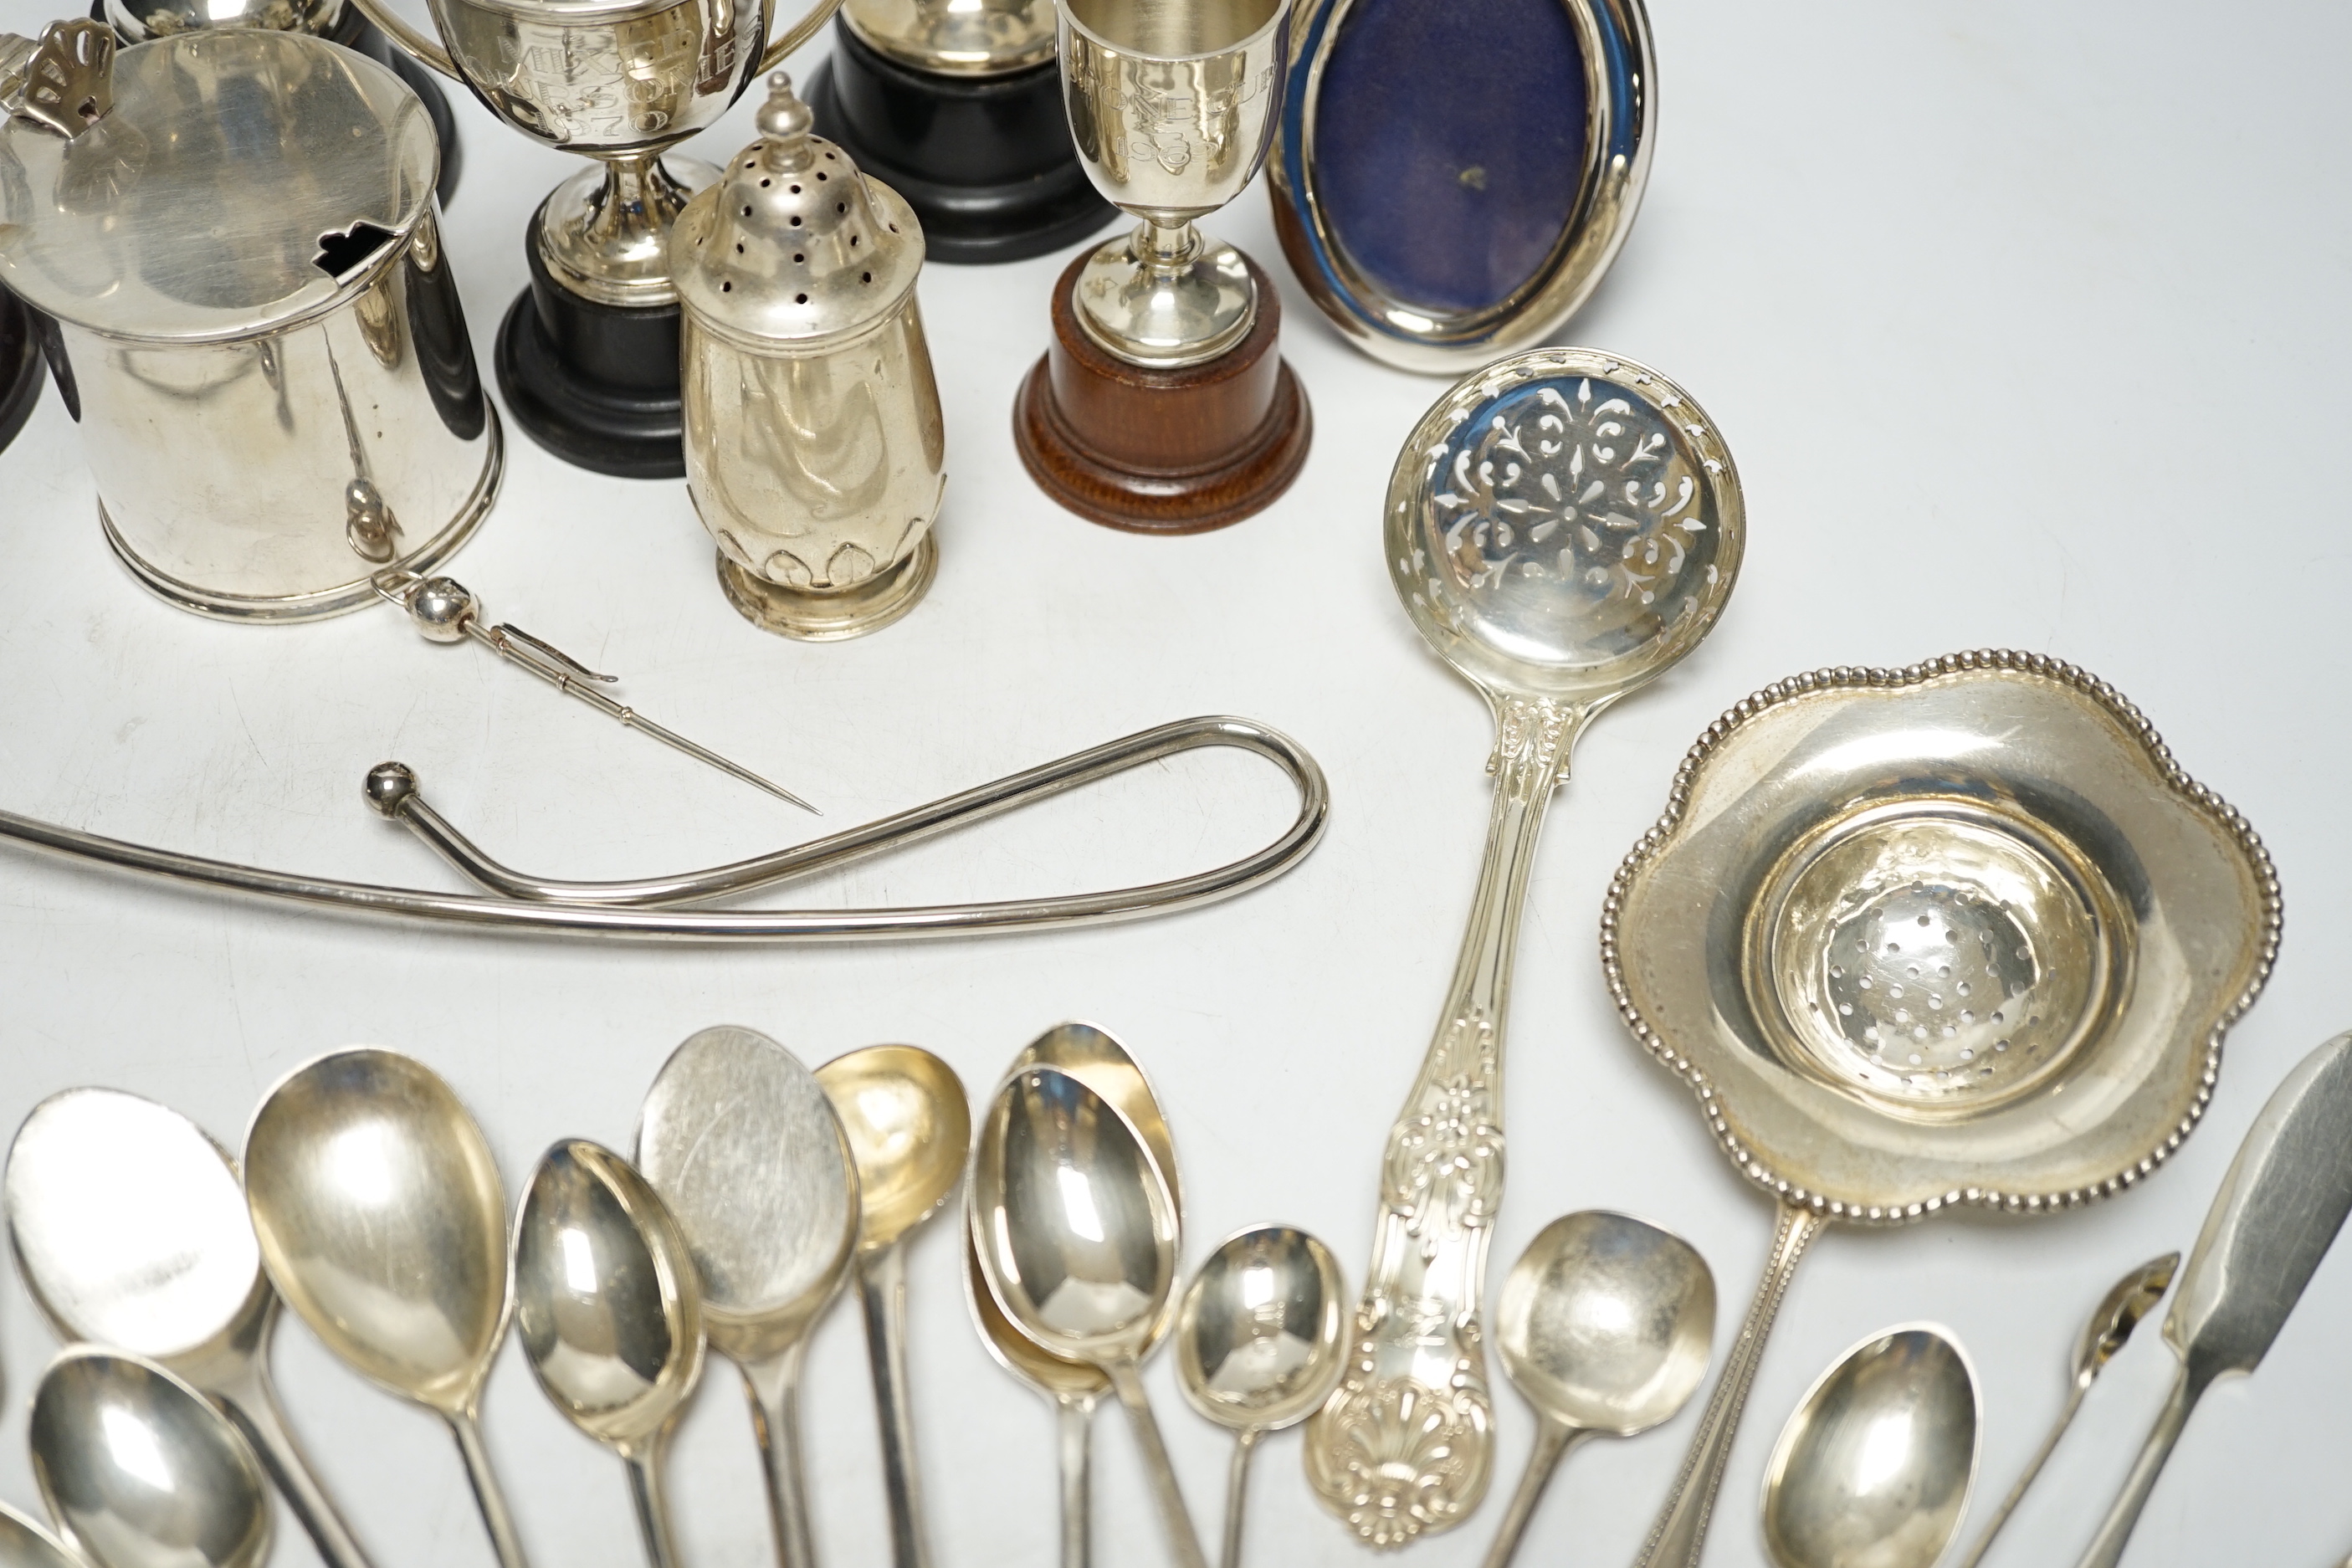 Sundry minor silver flatware including a Victorian Kings pattern sifter ladle, a silver mustard pot and pepperette, four small silver trophy cups and two other items.